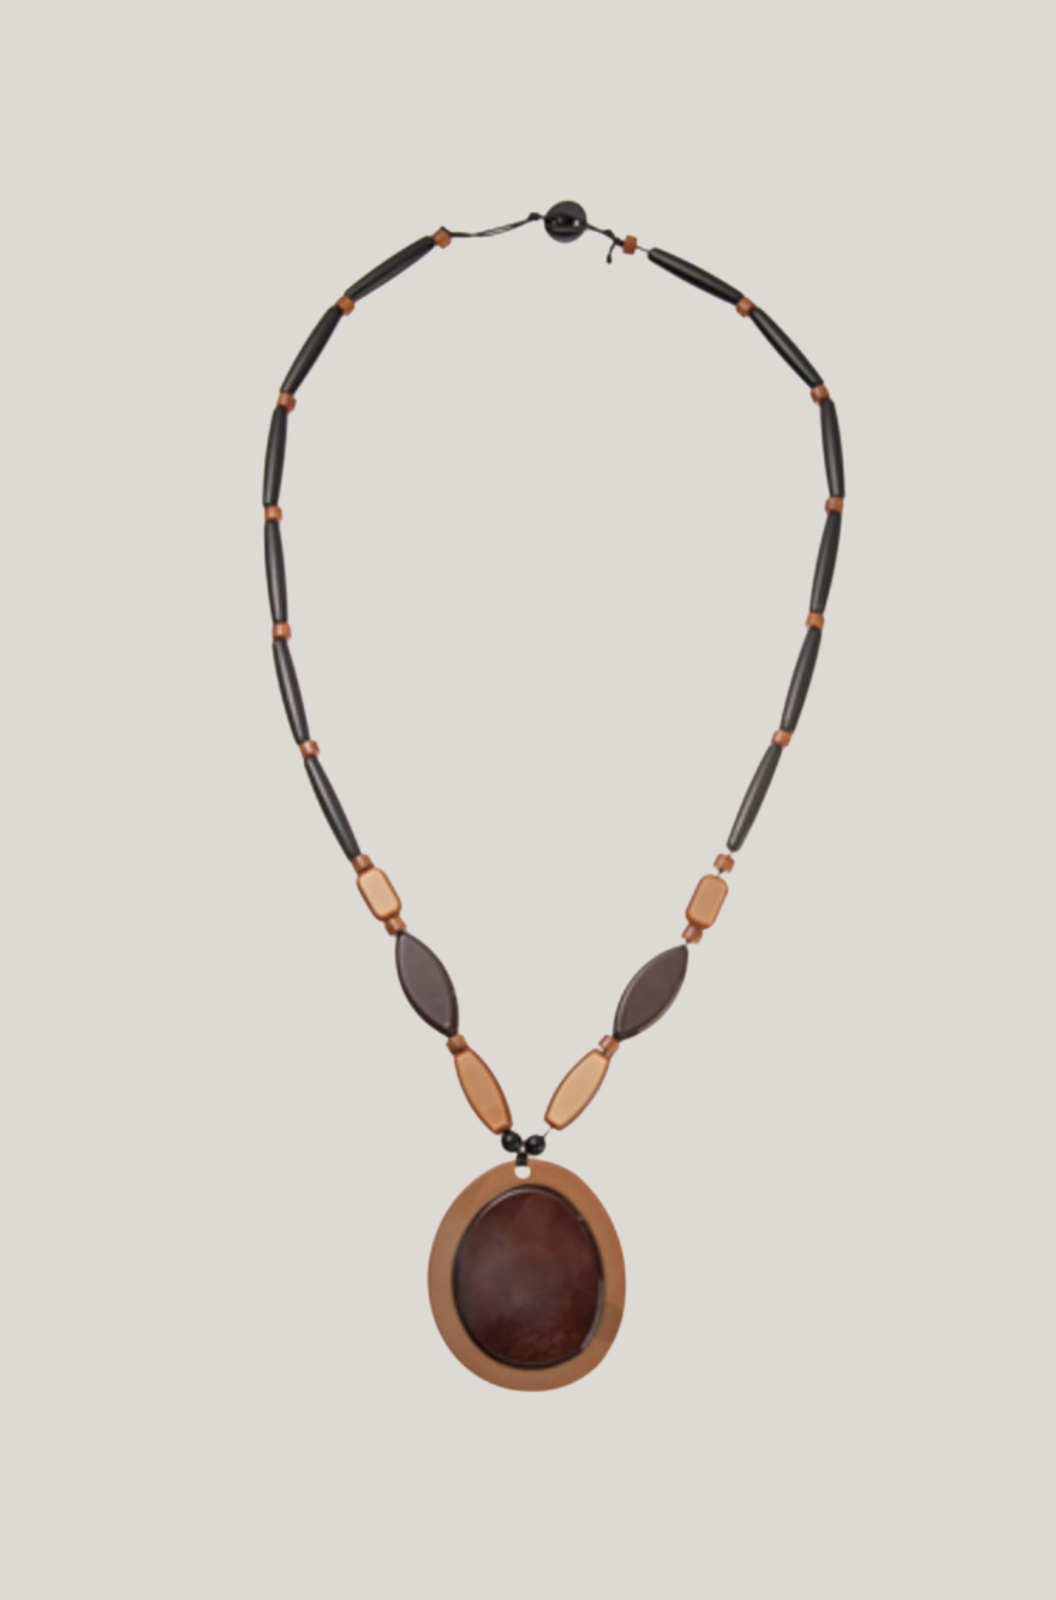 Blue Scarab Sia Necklace in Browns and Black bead with Circle Drop